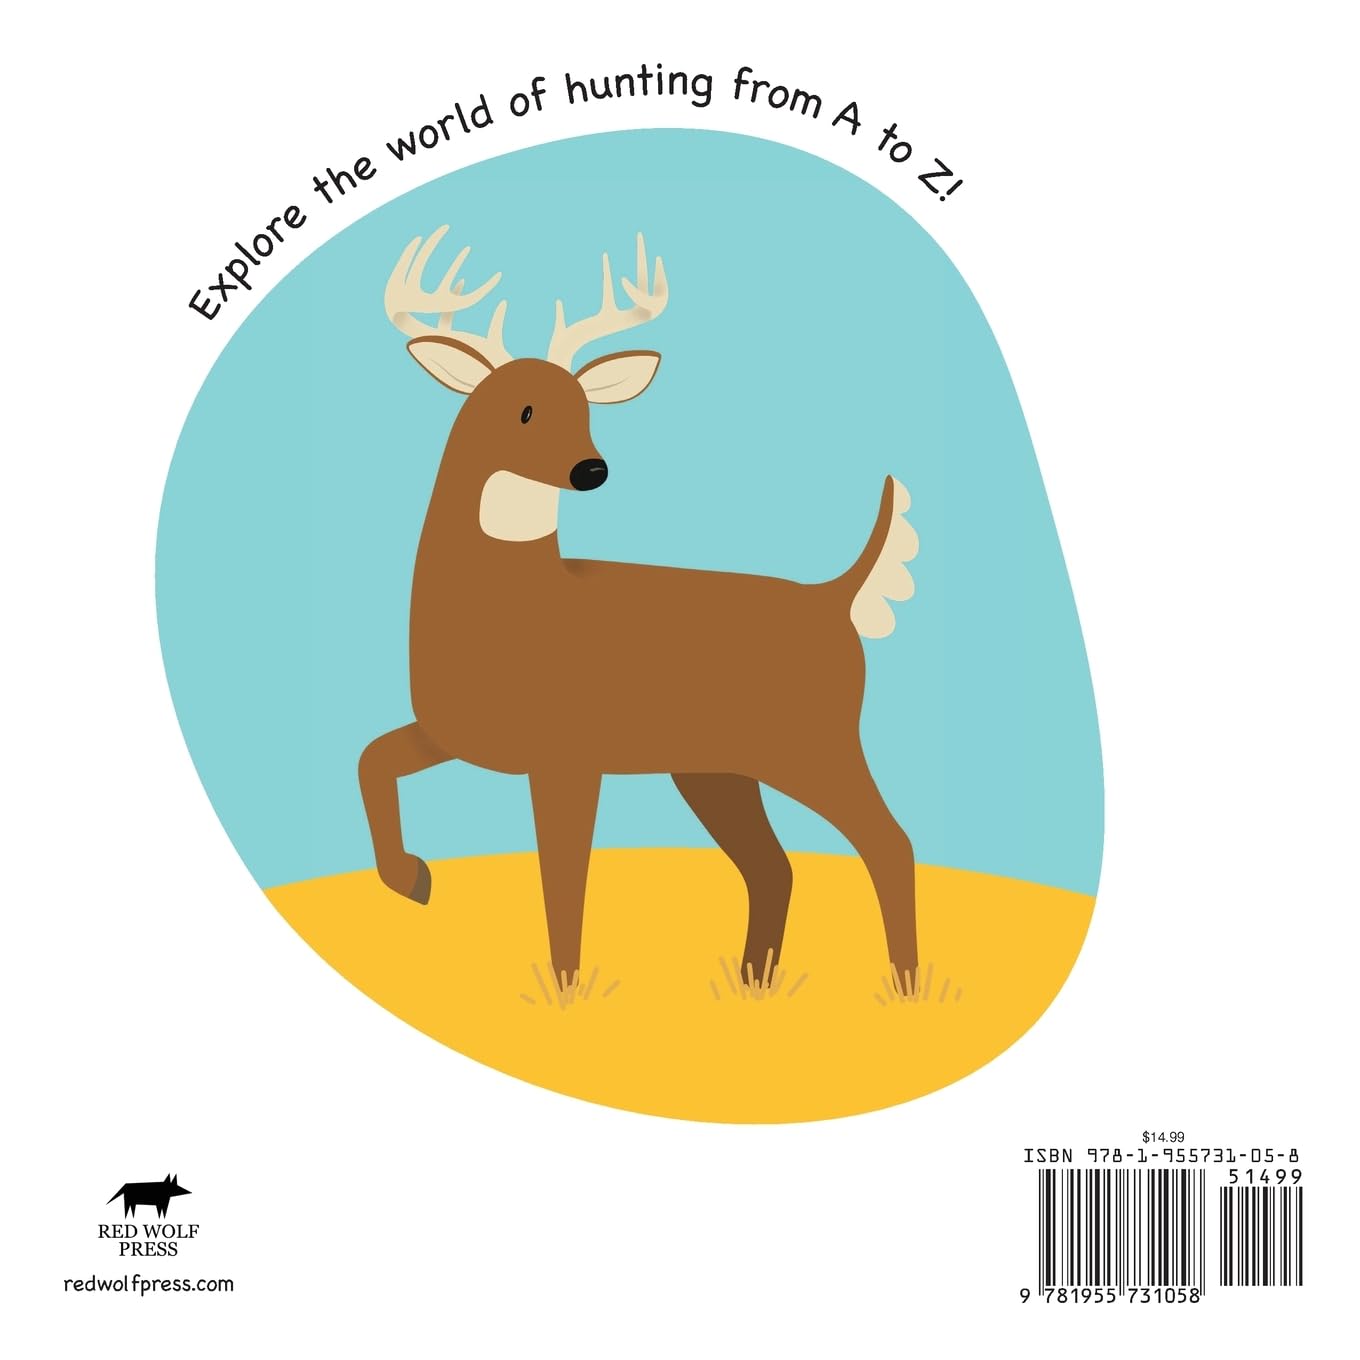 My First Book of Hunting ABC: A Rhyming Alphabet Primer for Children About Hunting and Outdoor Life